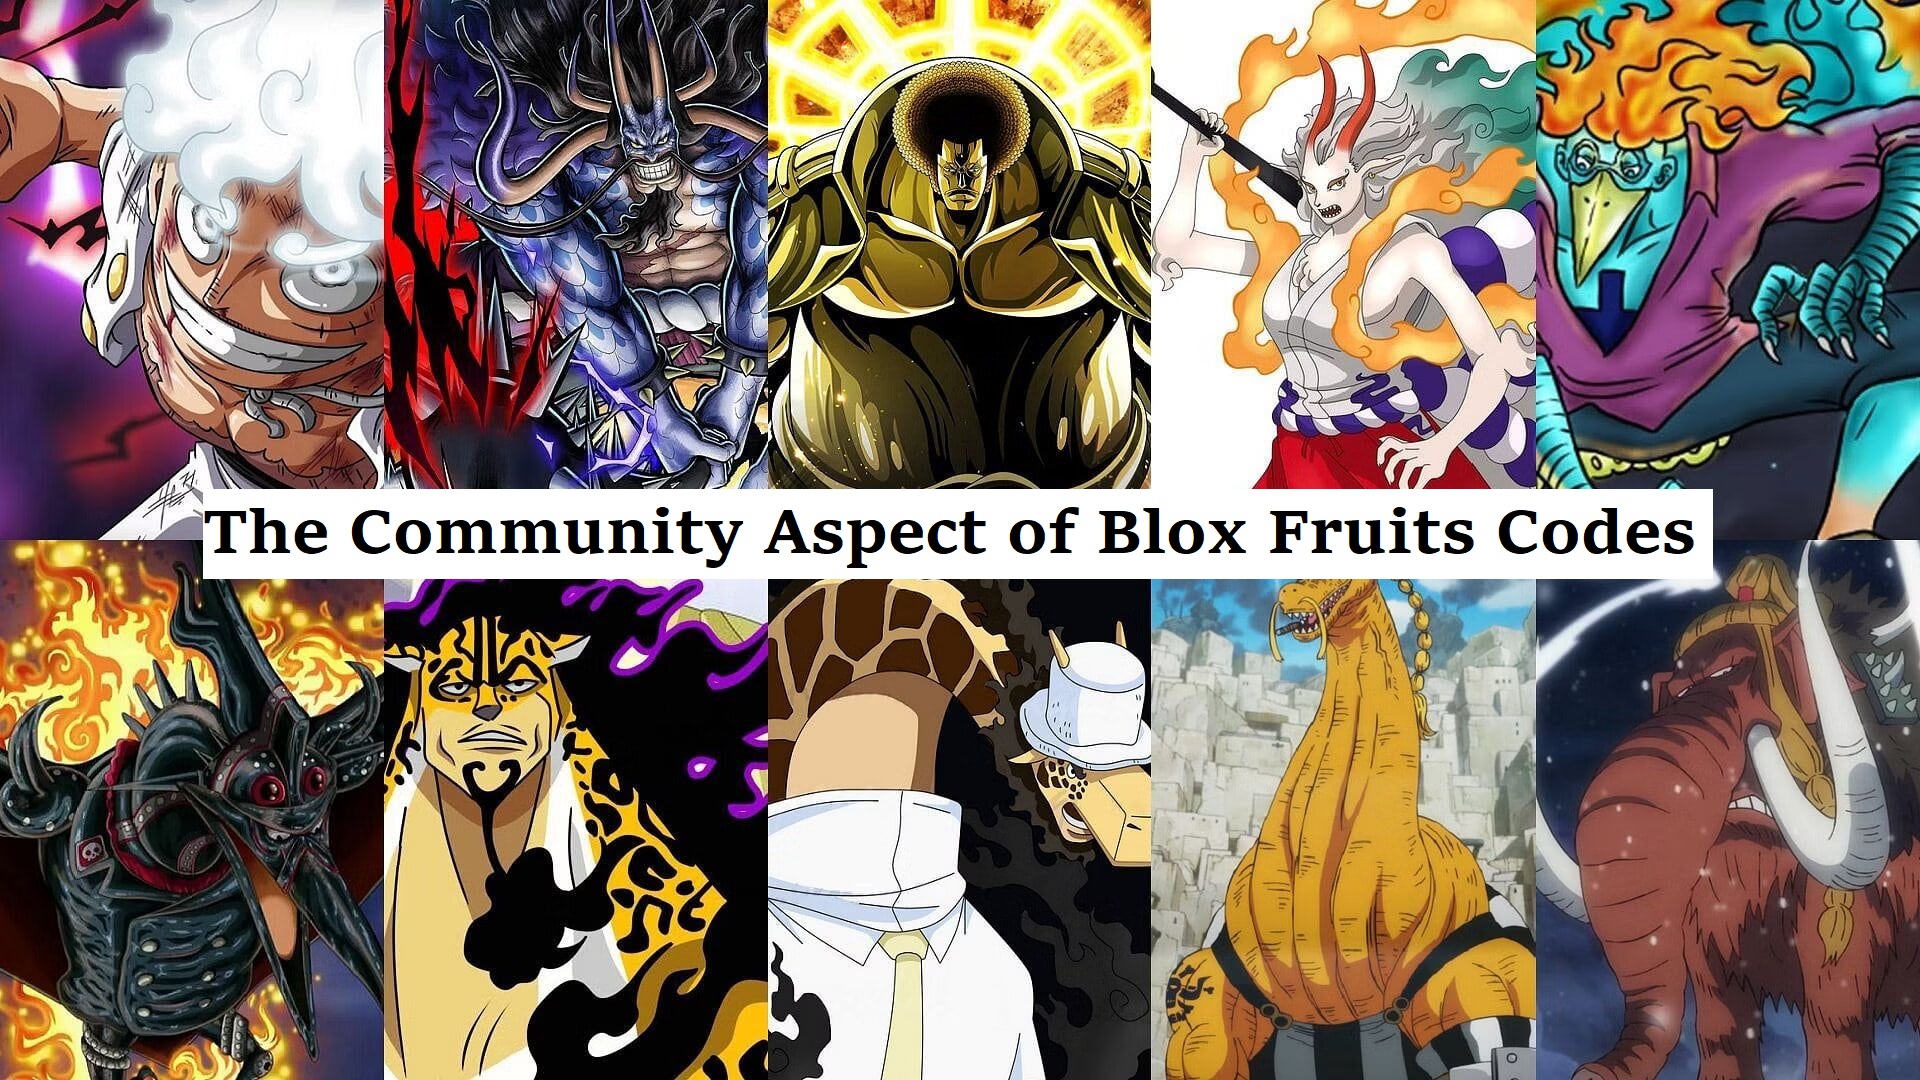 The Community Aspect of Blox Fruits Codes